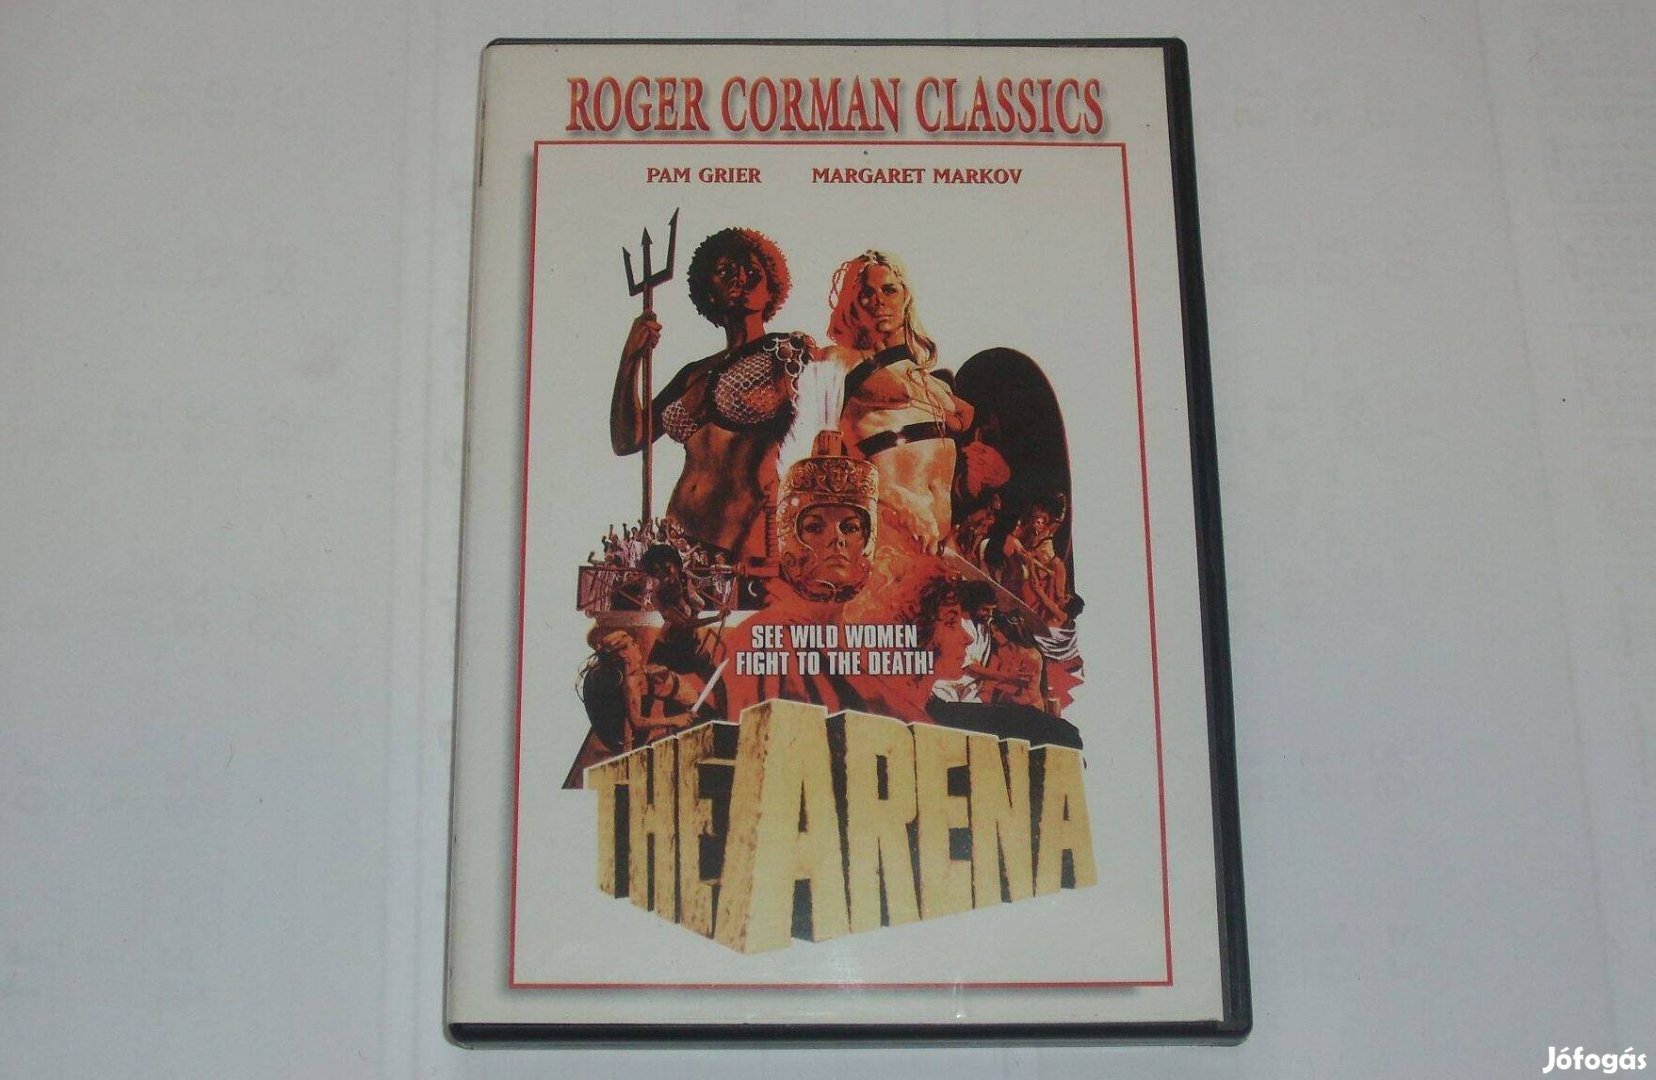 The Arena 1974. DVD Horror